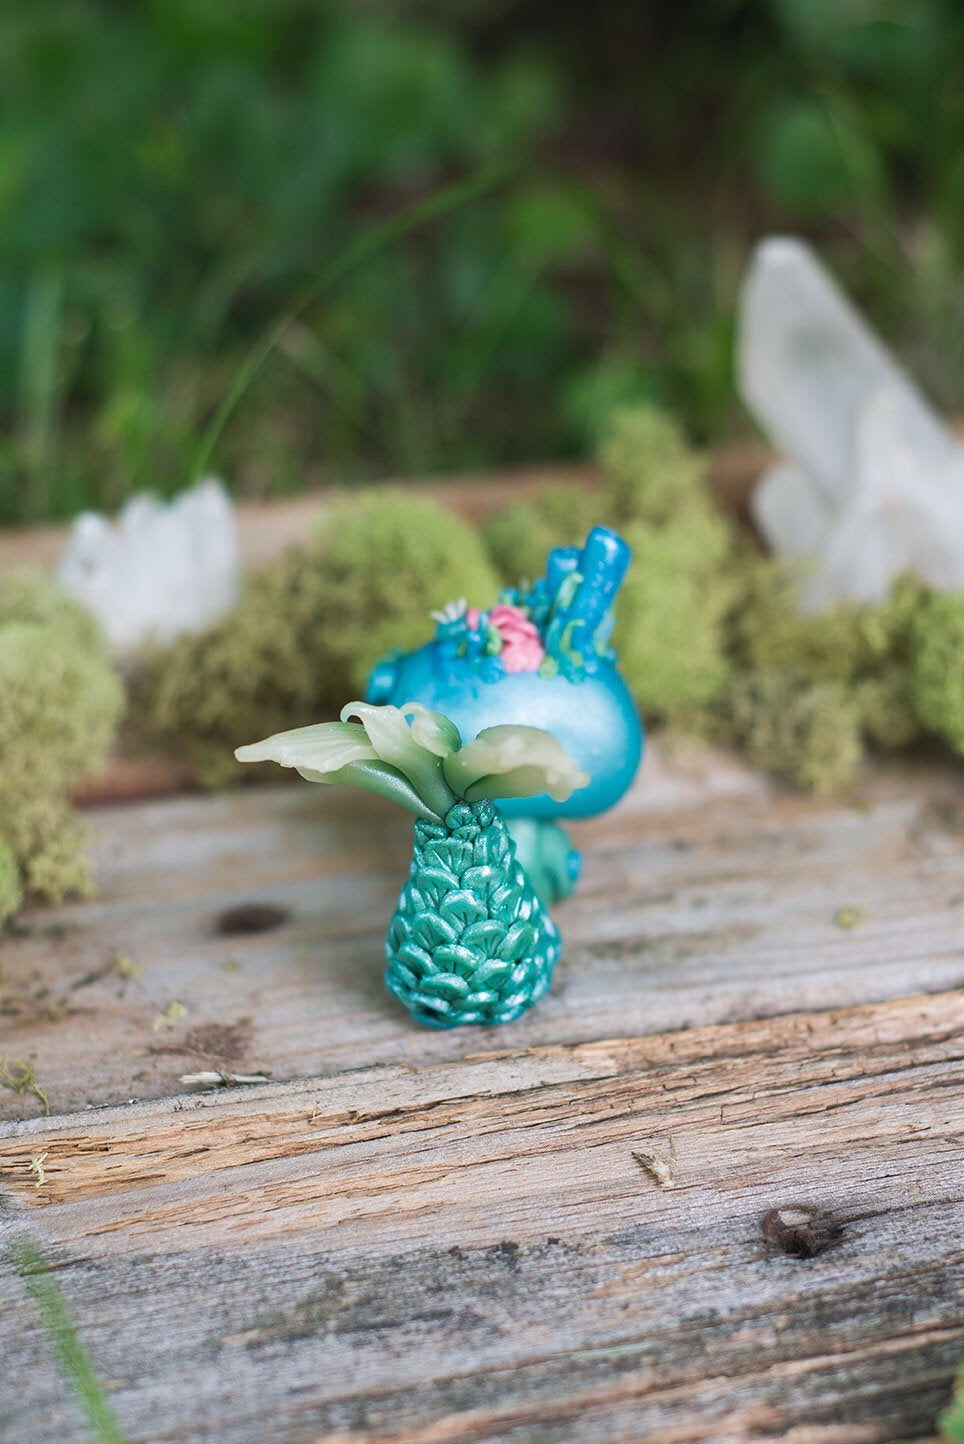 Back Tail View of Blue & Green Mermish - handmade polymer clay mermaid creature with coral reef on head holding obsidian